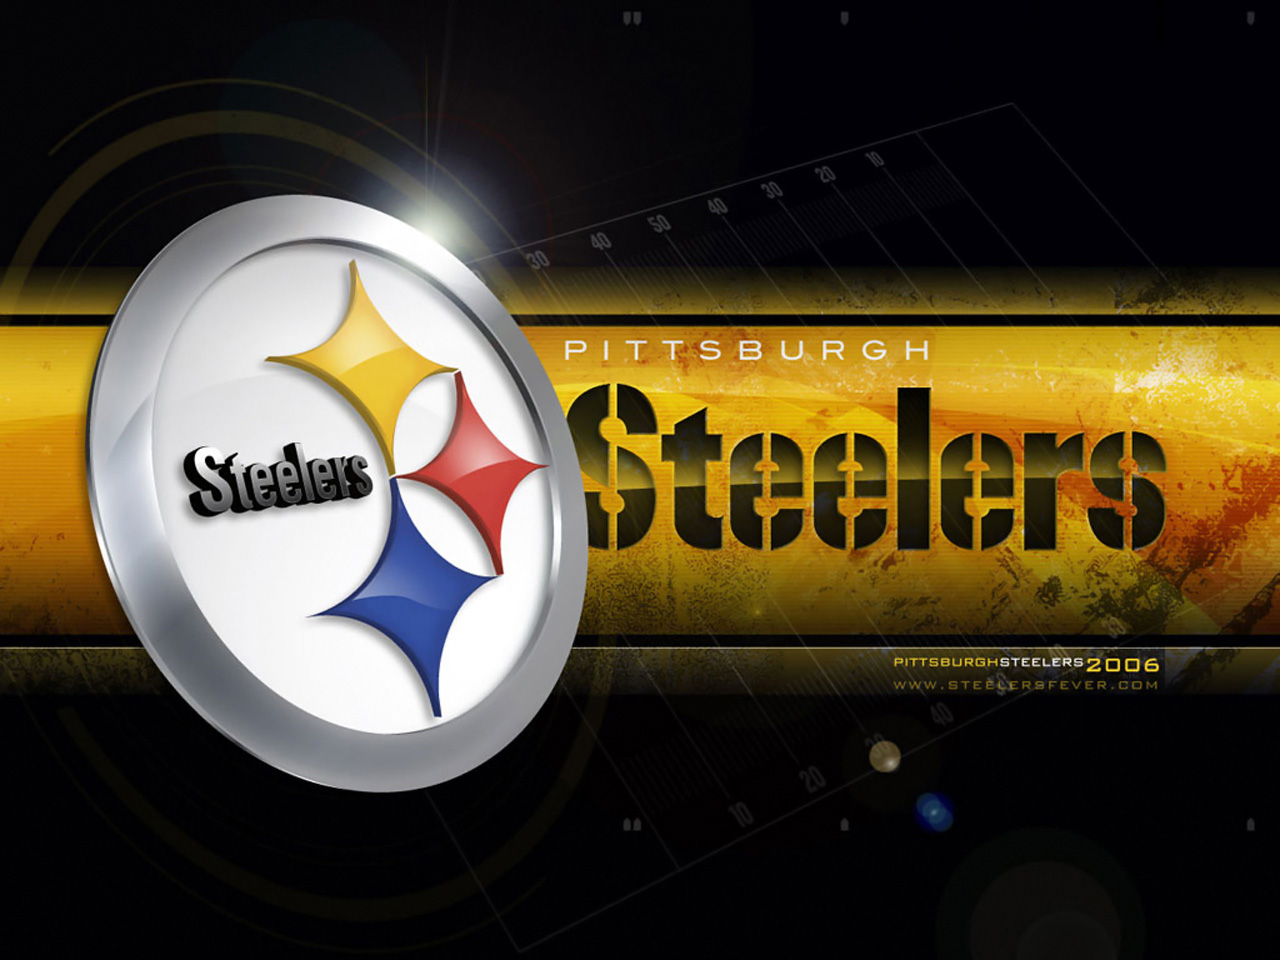 The best Pittsburgh Steelers wallpaper ever?